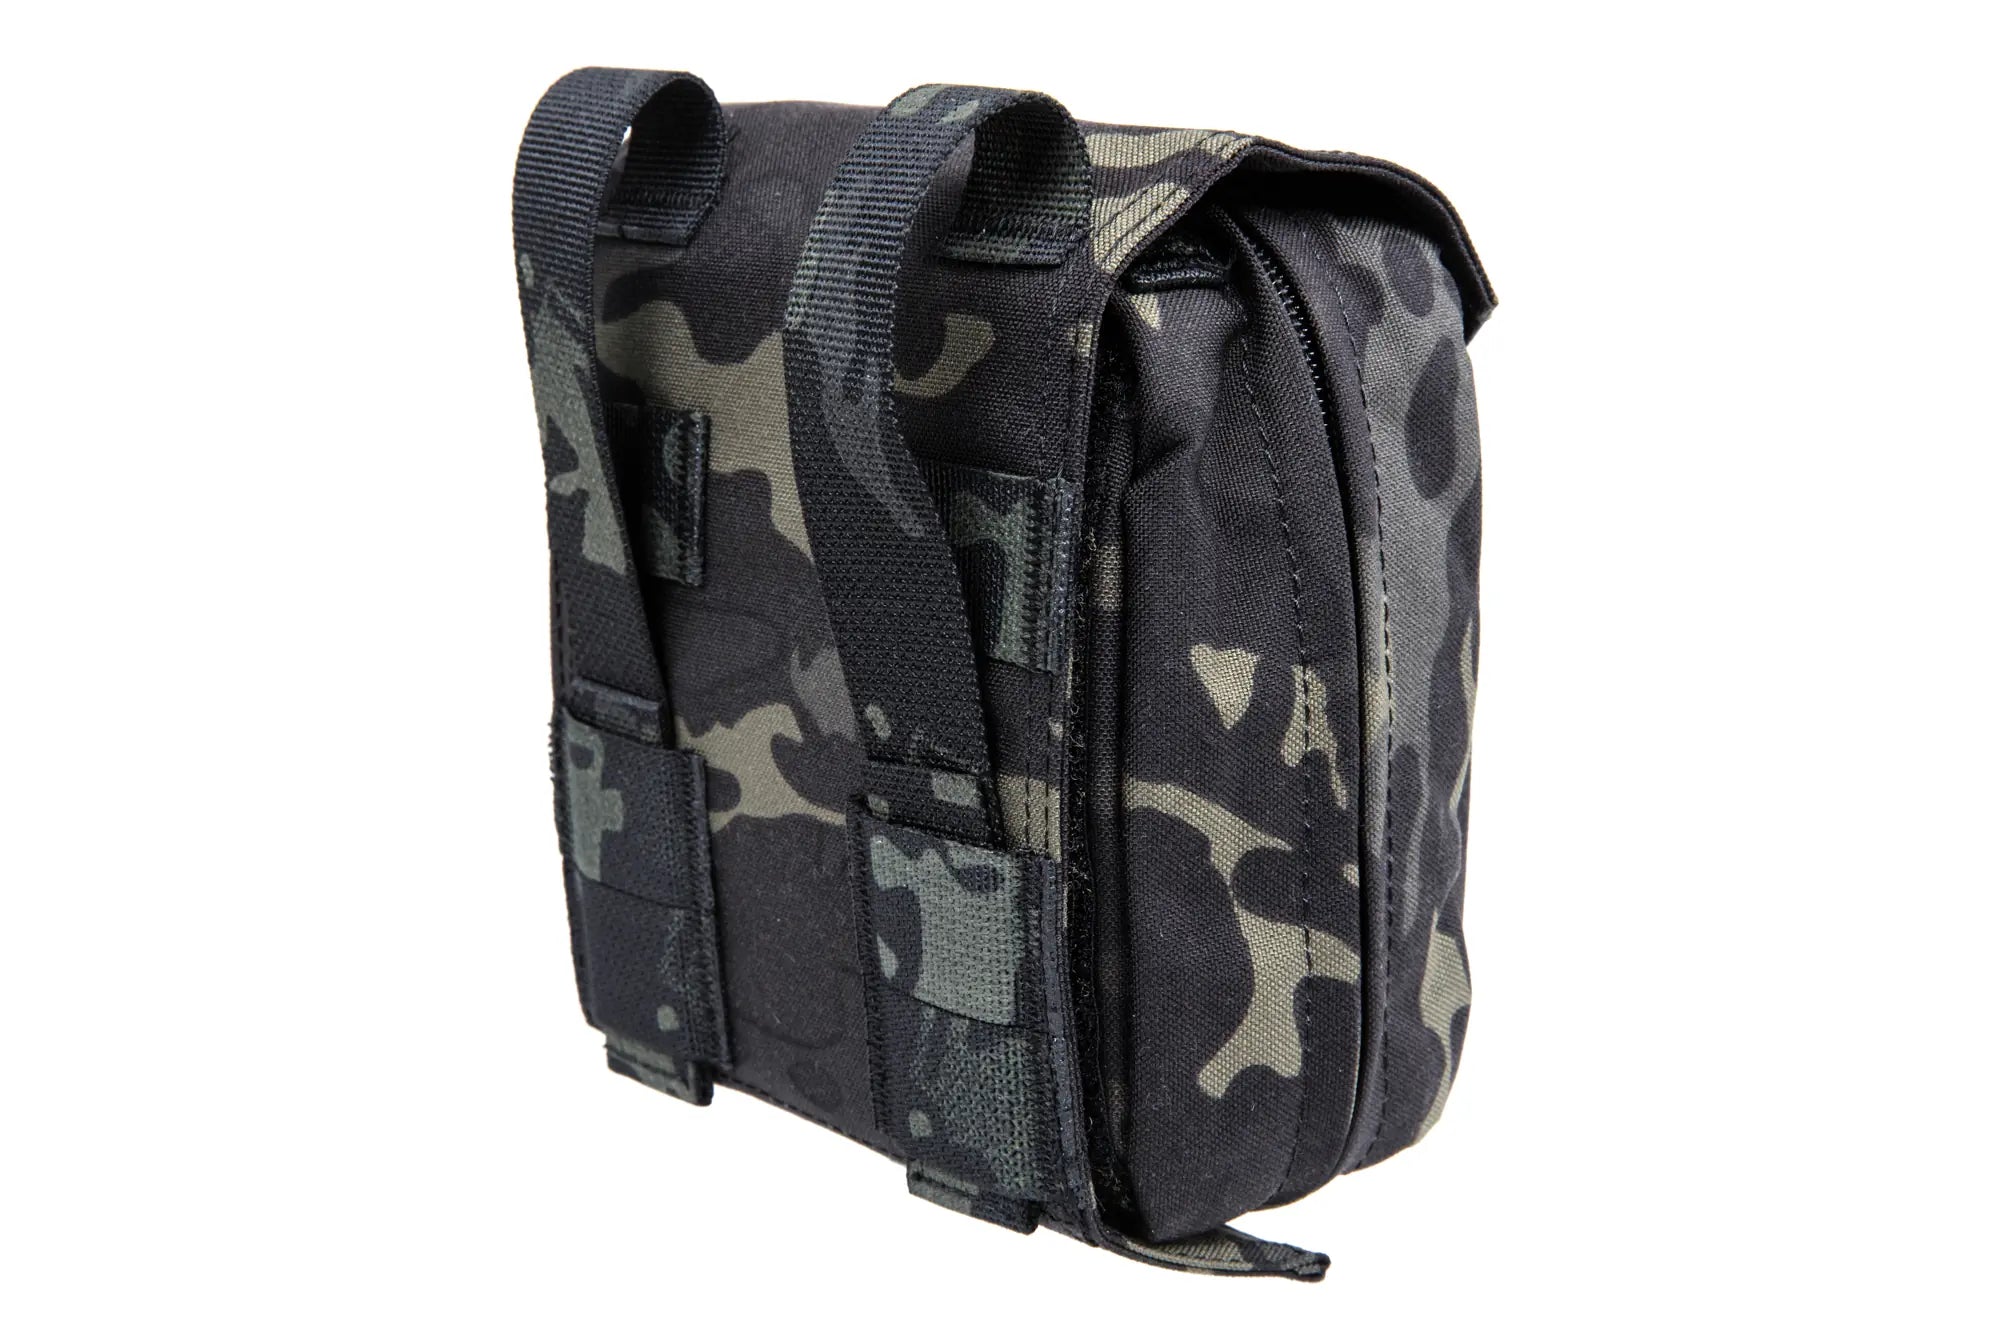 First aid kit with Molle panel Wosport Multicam Black-4